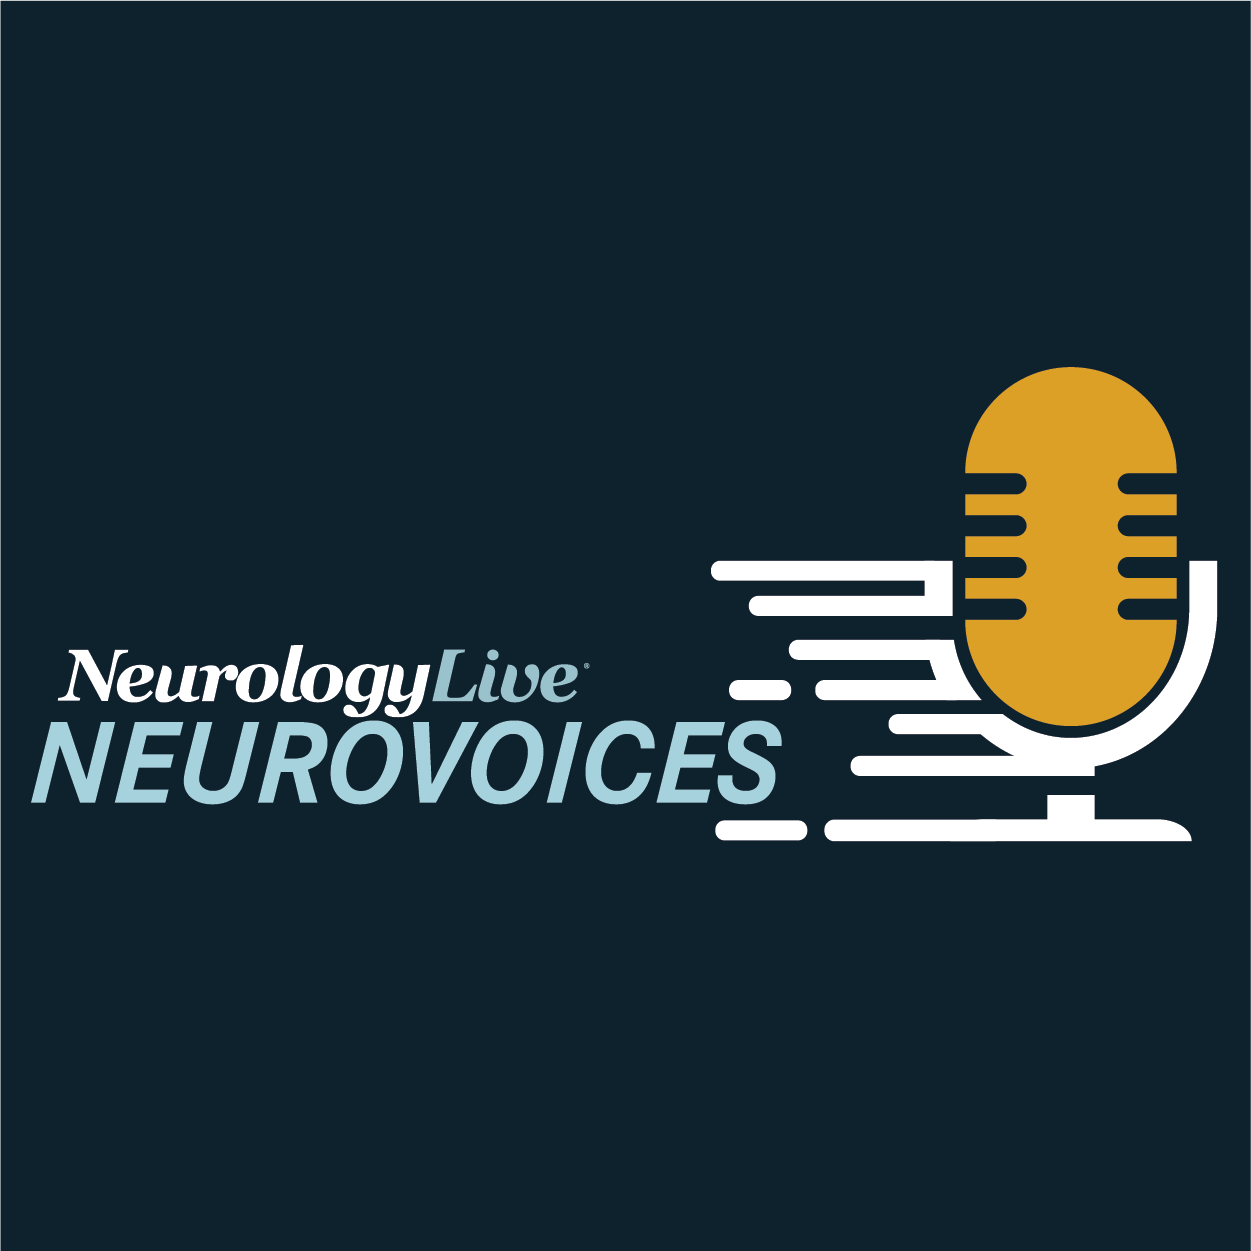 NeuroVoices: Imad Najm, MD, on Aiming to Prevent Neurological Disorders Before Symptom Onset